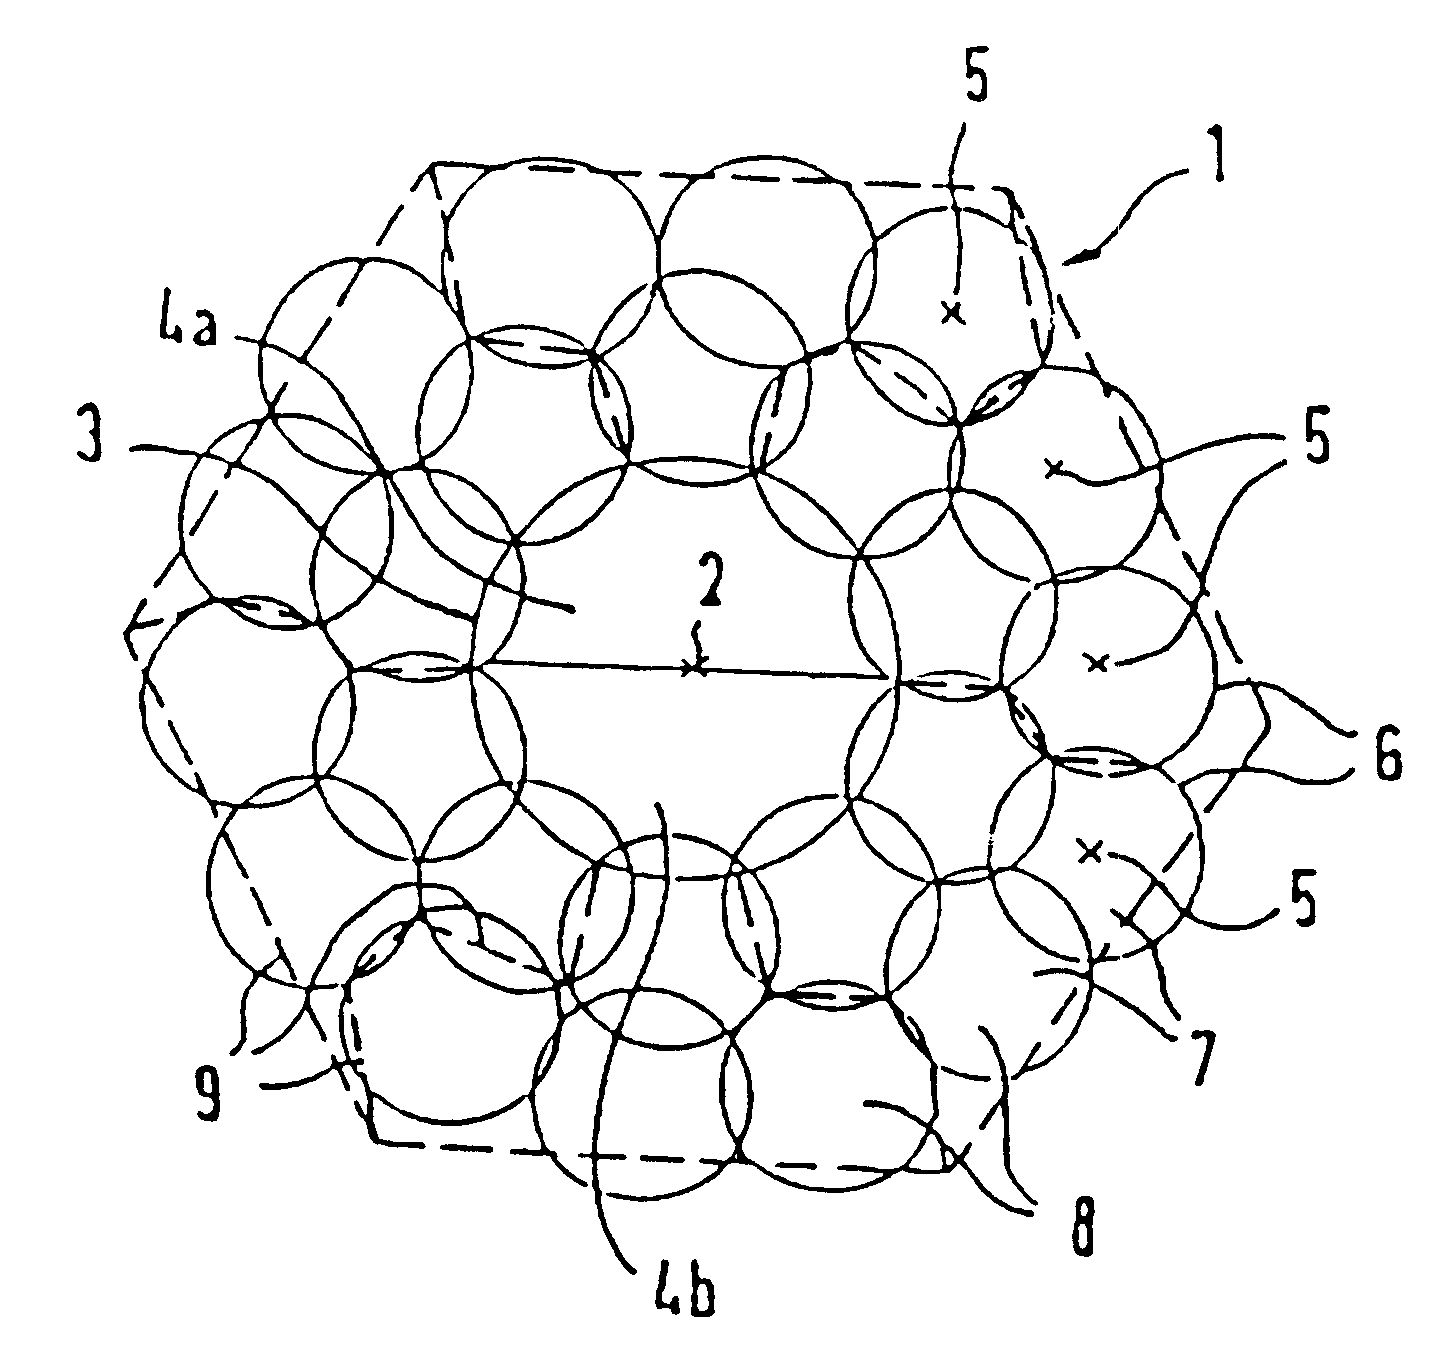 Arrangements of base transceiver stations of an area-covering network